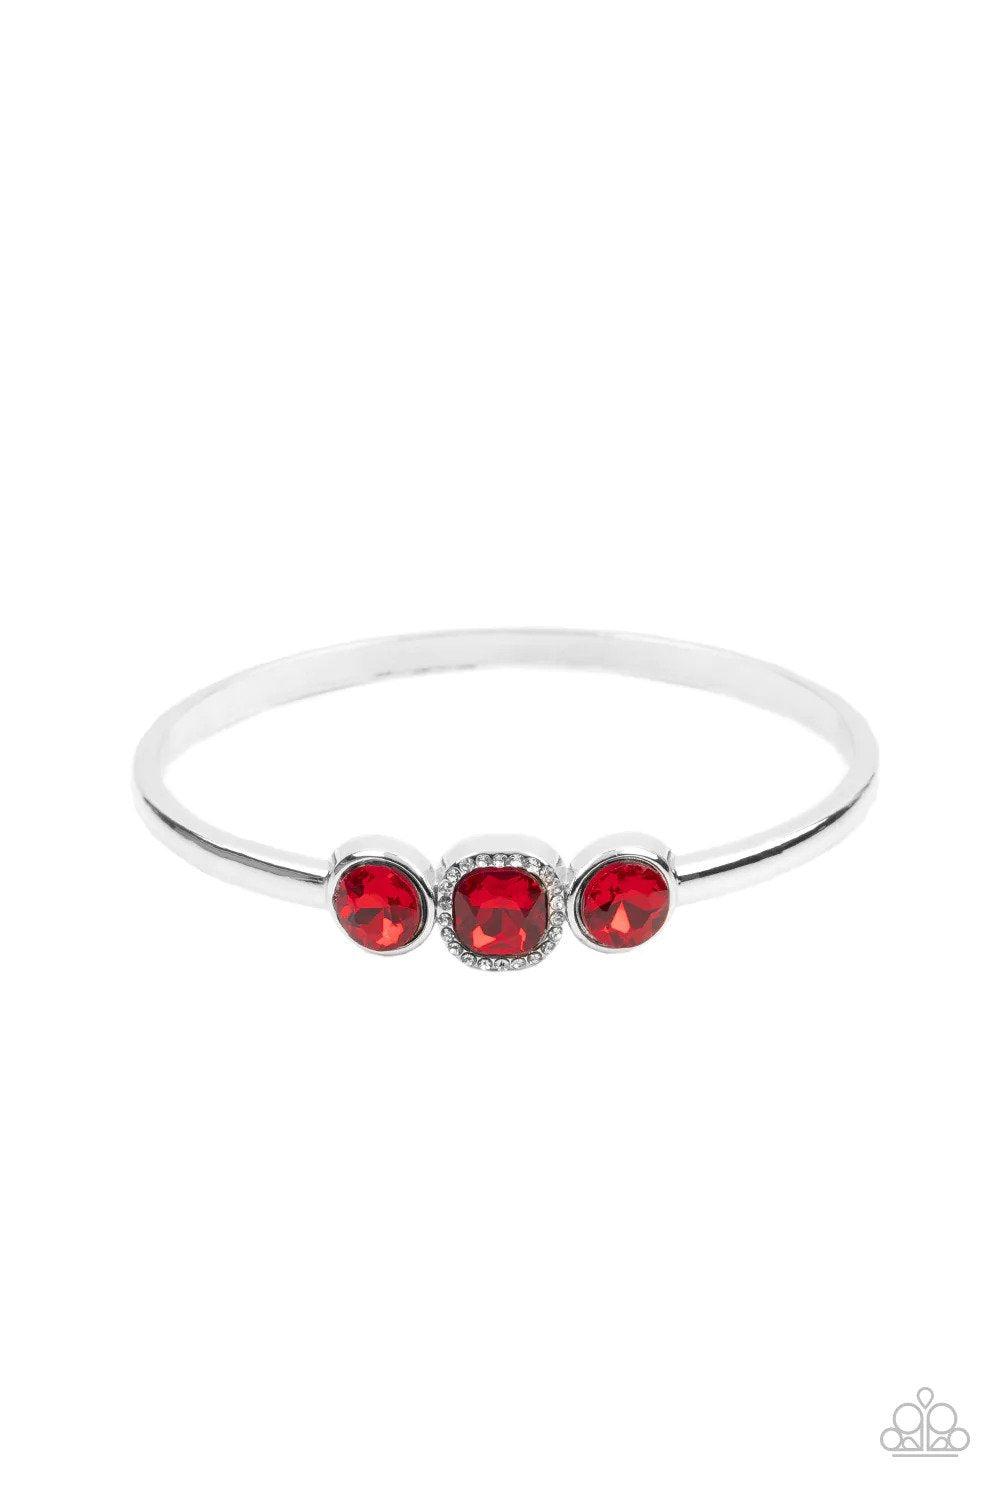 Royal Demands Red Bracelet - Paparazzi Accessories- lightbox - CarasShop.com - $5 Jewelry by Cara Jewels